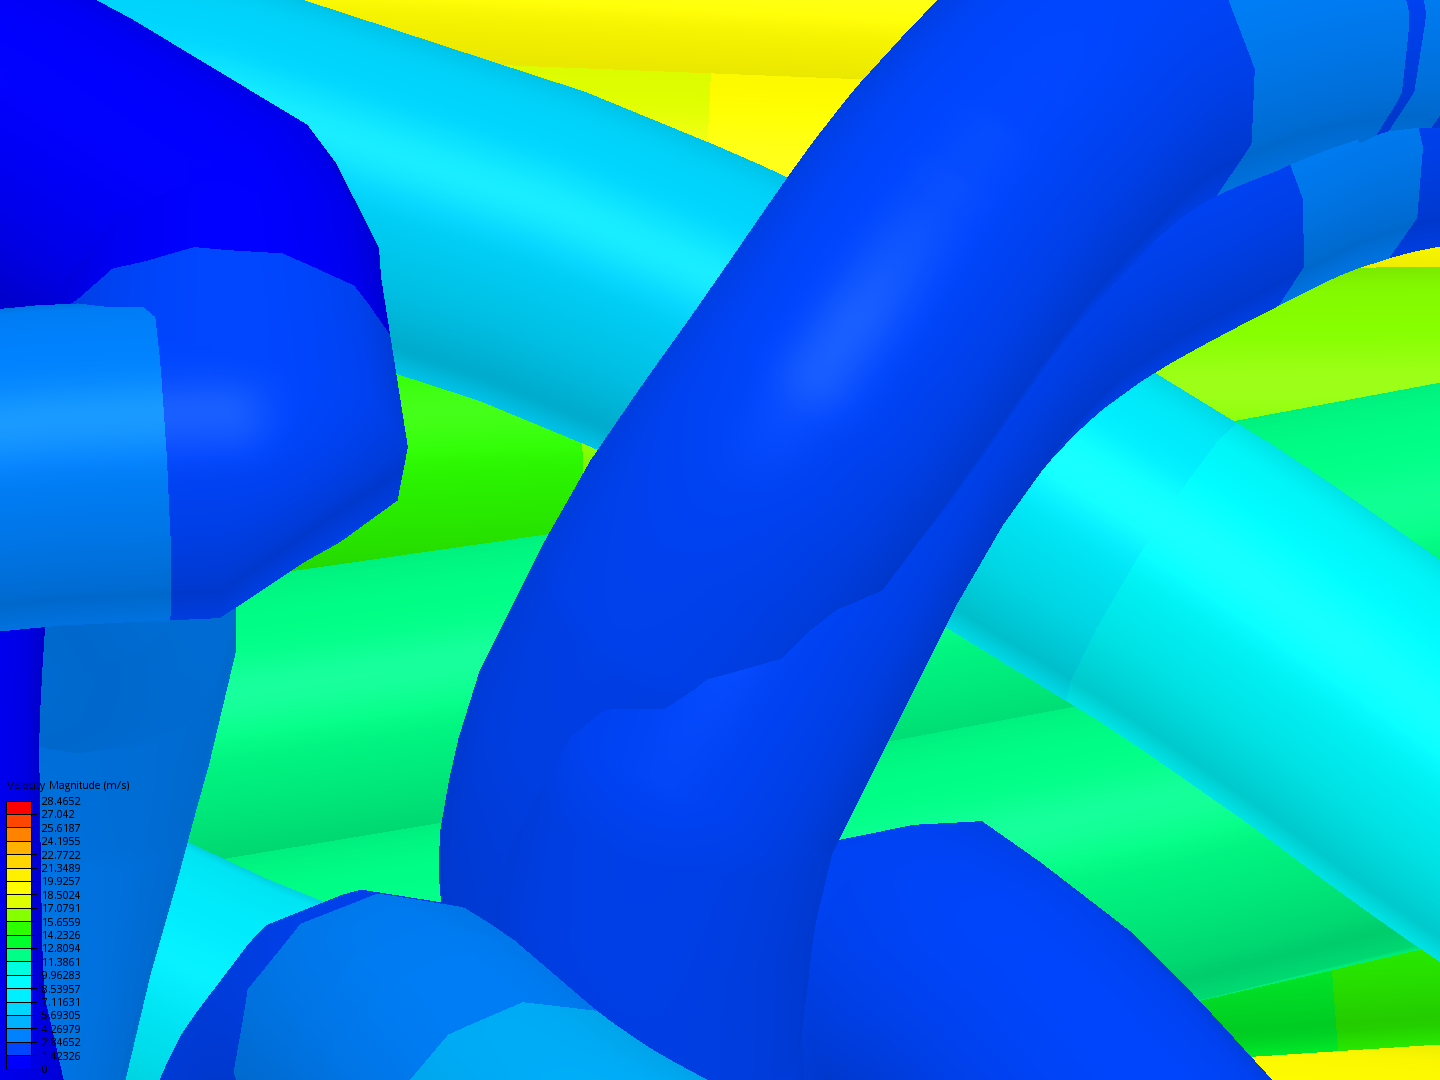 F1 CFD Test 5 image